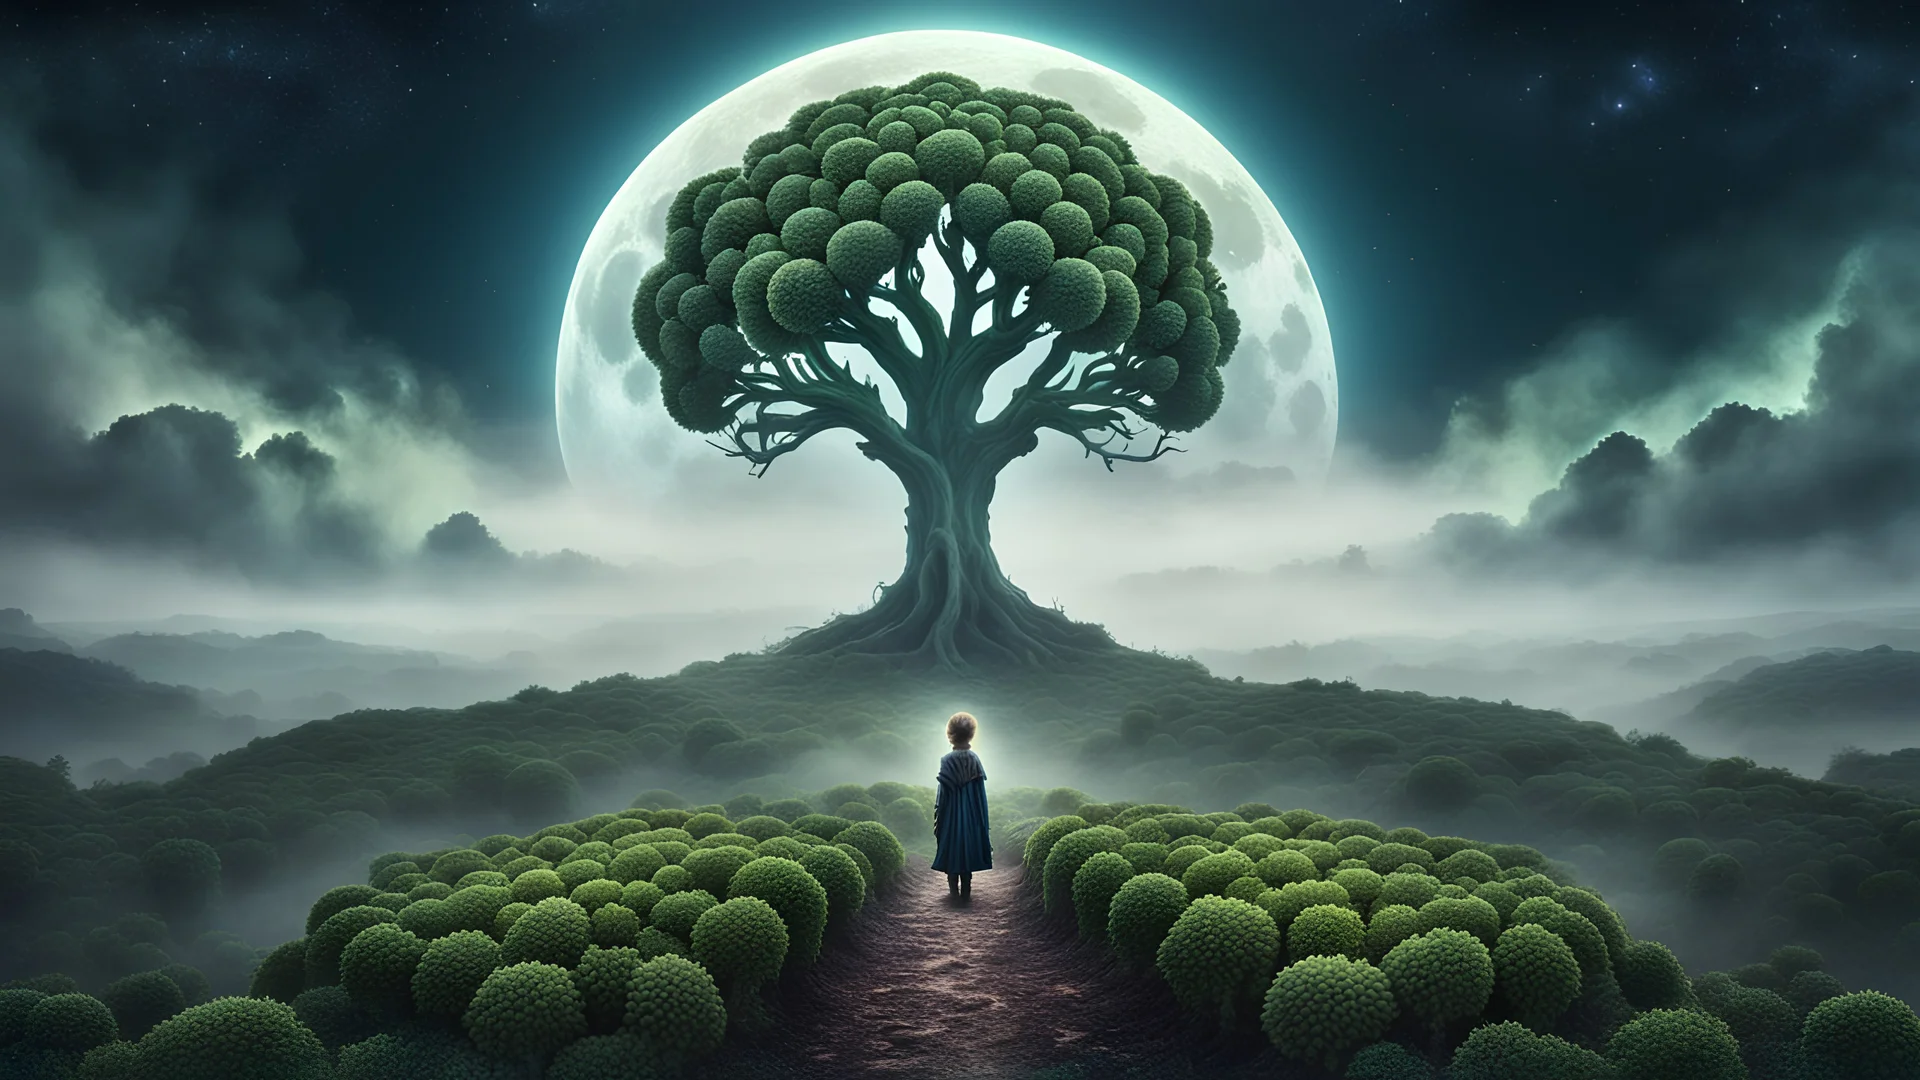 A symmetrical moon that looks like a happy origin head fractal broccoli above a landscape, a kid in a ragged dress looks up in the distance, fog, and intricate background HDR, 8k, epic colors, fantasy surrealism, in the style of gothic